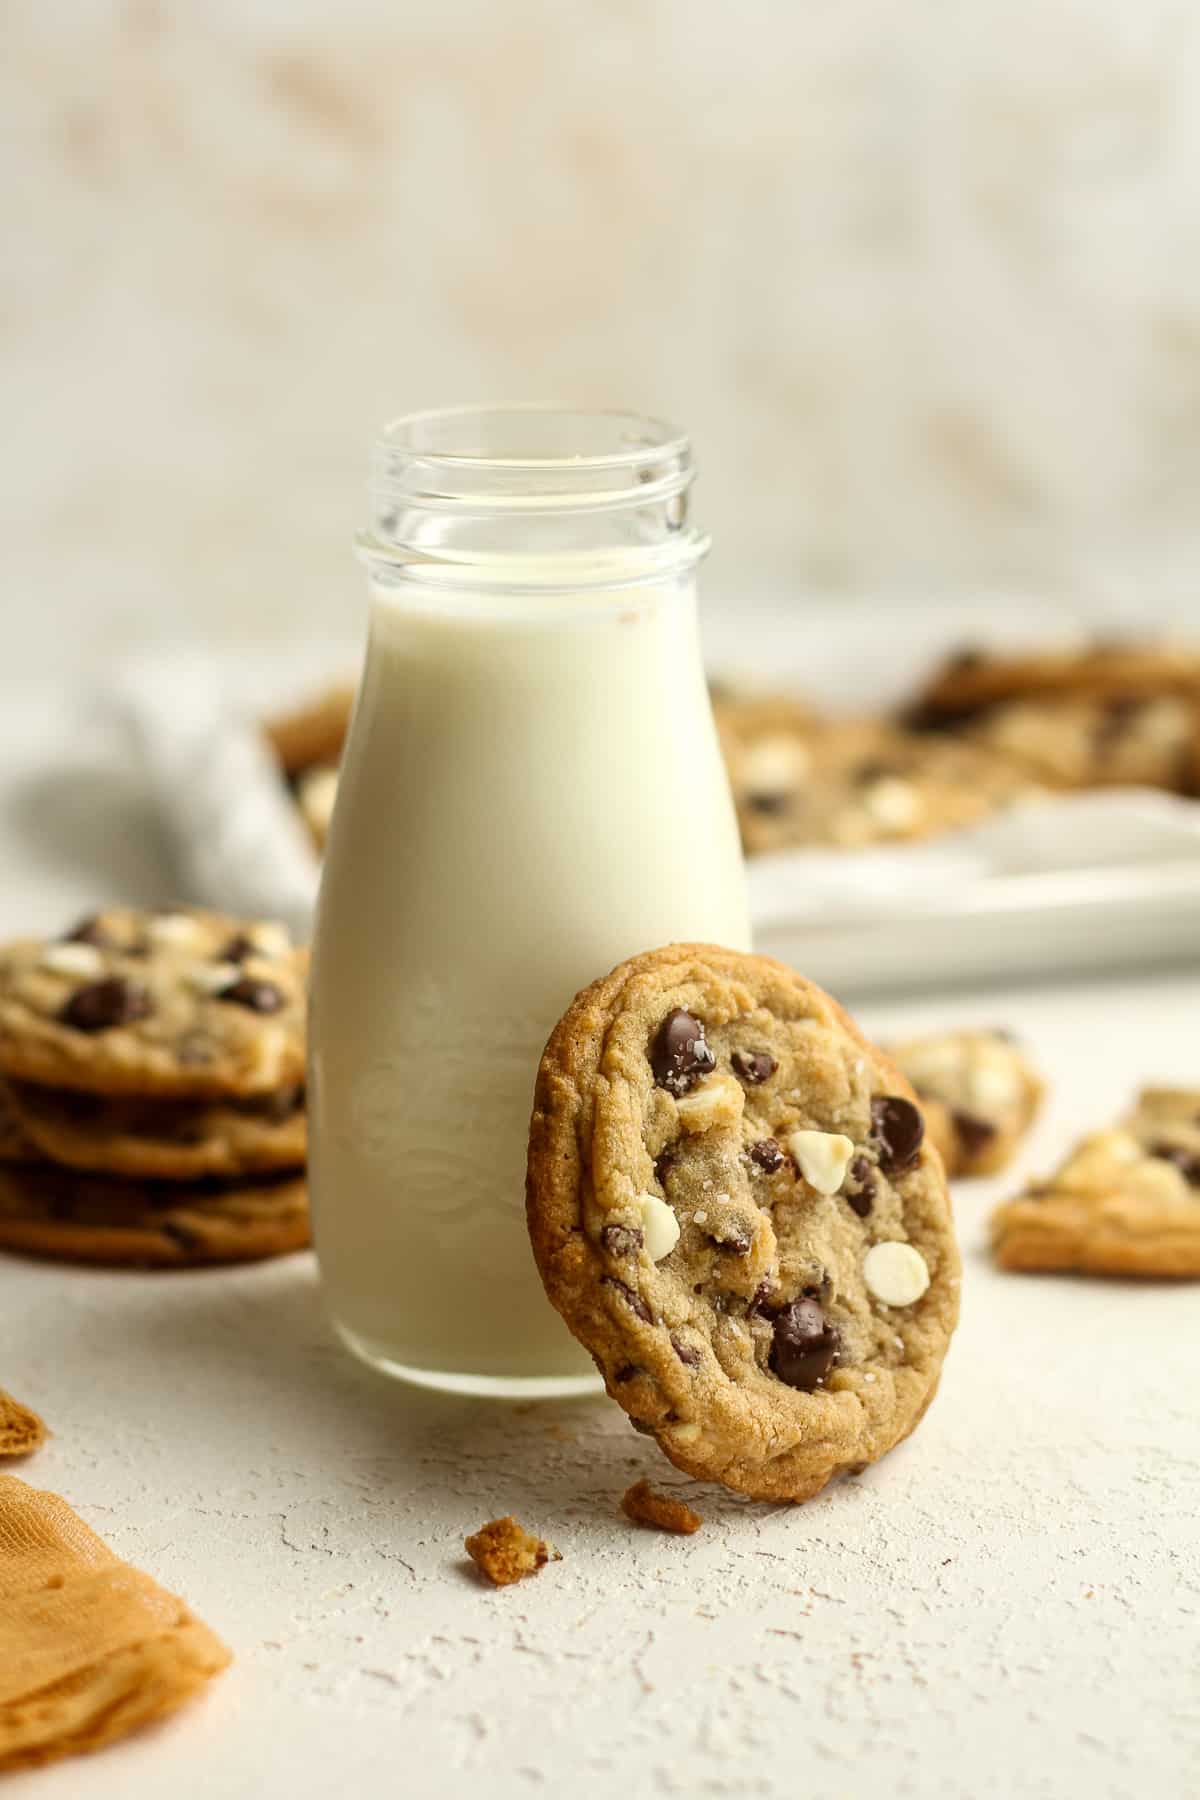 A chocolate chip cookie leaning against a jar of milk.